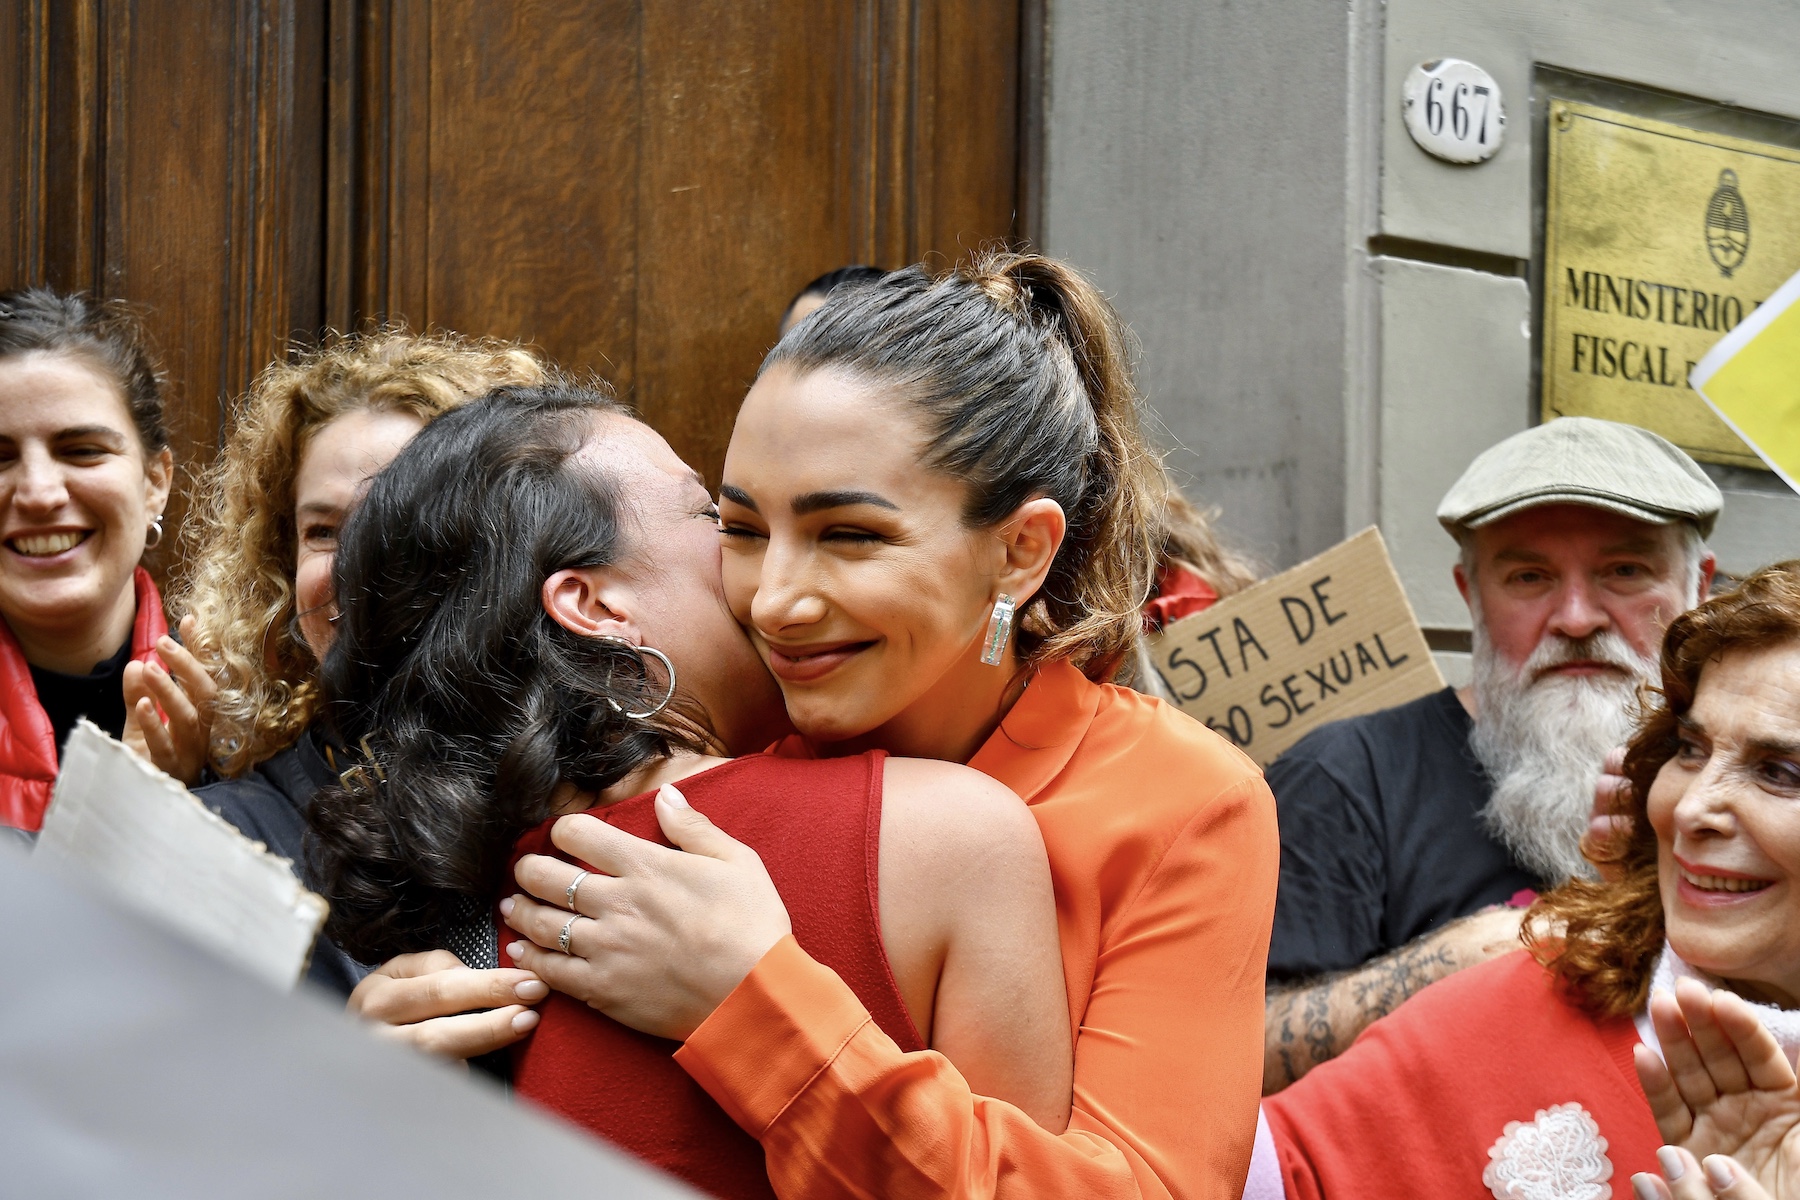 A Court Has Rejected This Argentine Actress’ Historic #MeToo Case Against A Famous Actor